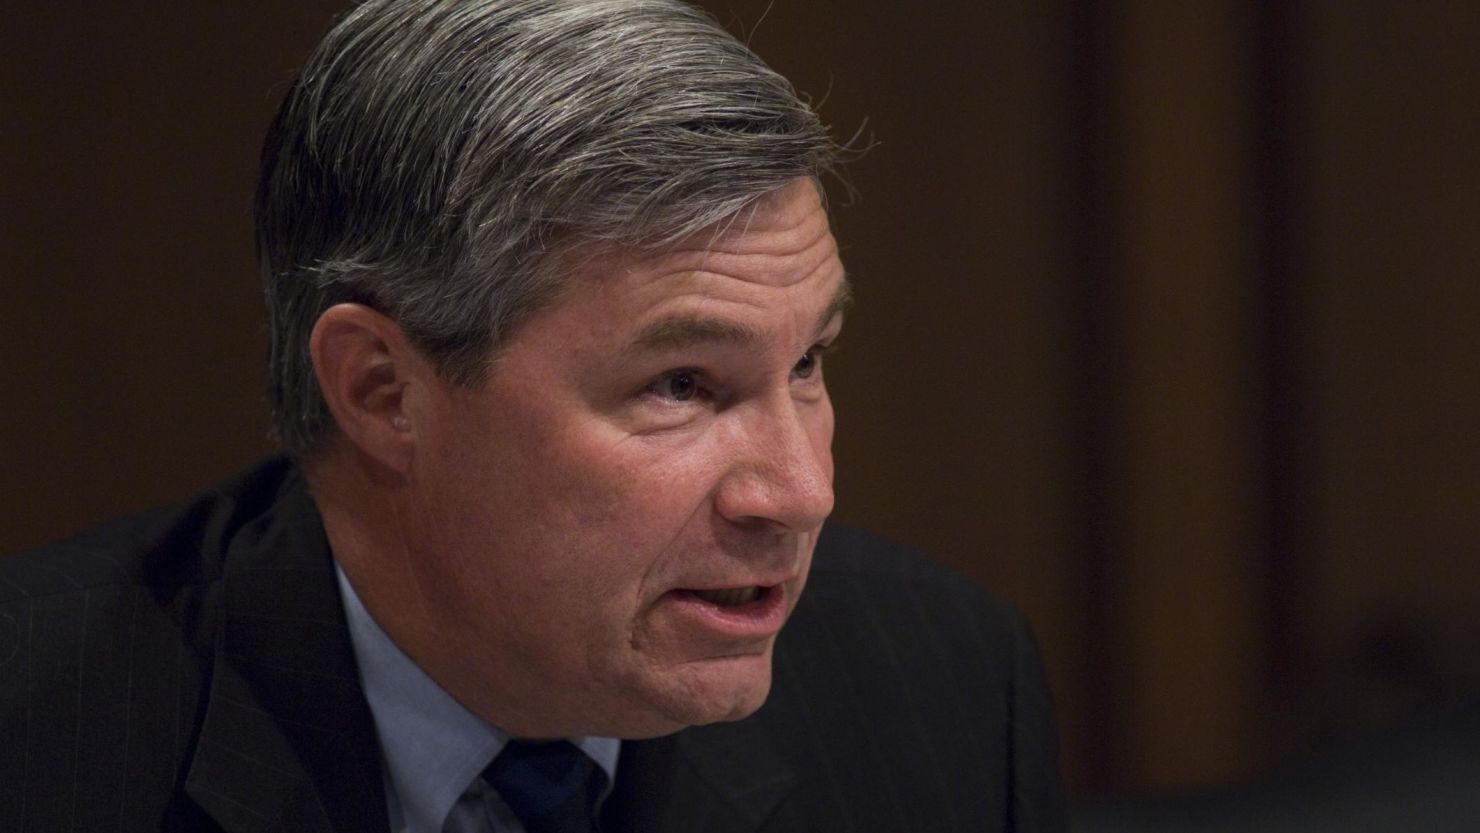 WASHINGTON, DC - July 13: Sen. Sheldon Whitehouse, D-R.I., delivers his opening statement during the Senate Judiciary hearing for President Obama's U.S. Supreme Court nominee Sonia Sotomayor. (Photo by Scott J. Ferrell/Congressional Quarterly/Getty Images)